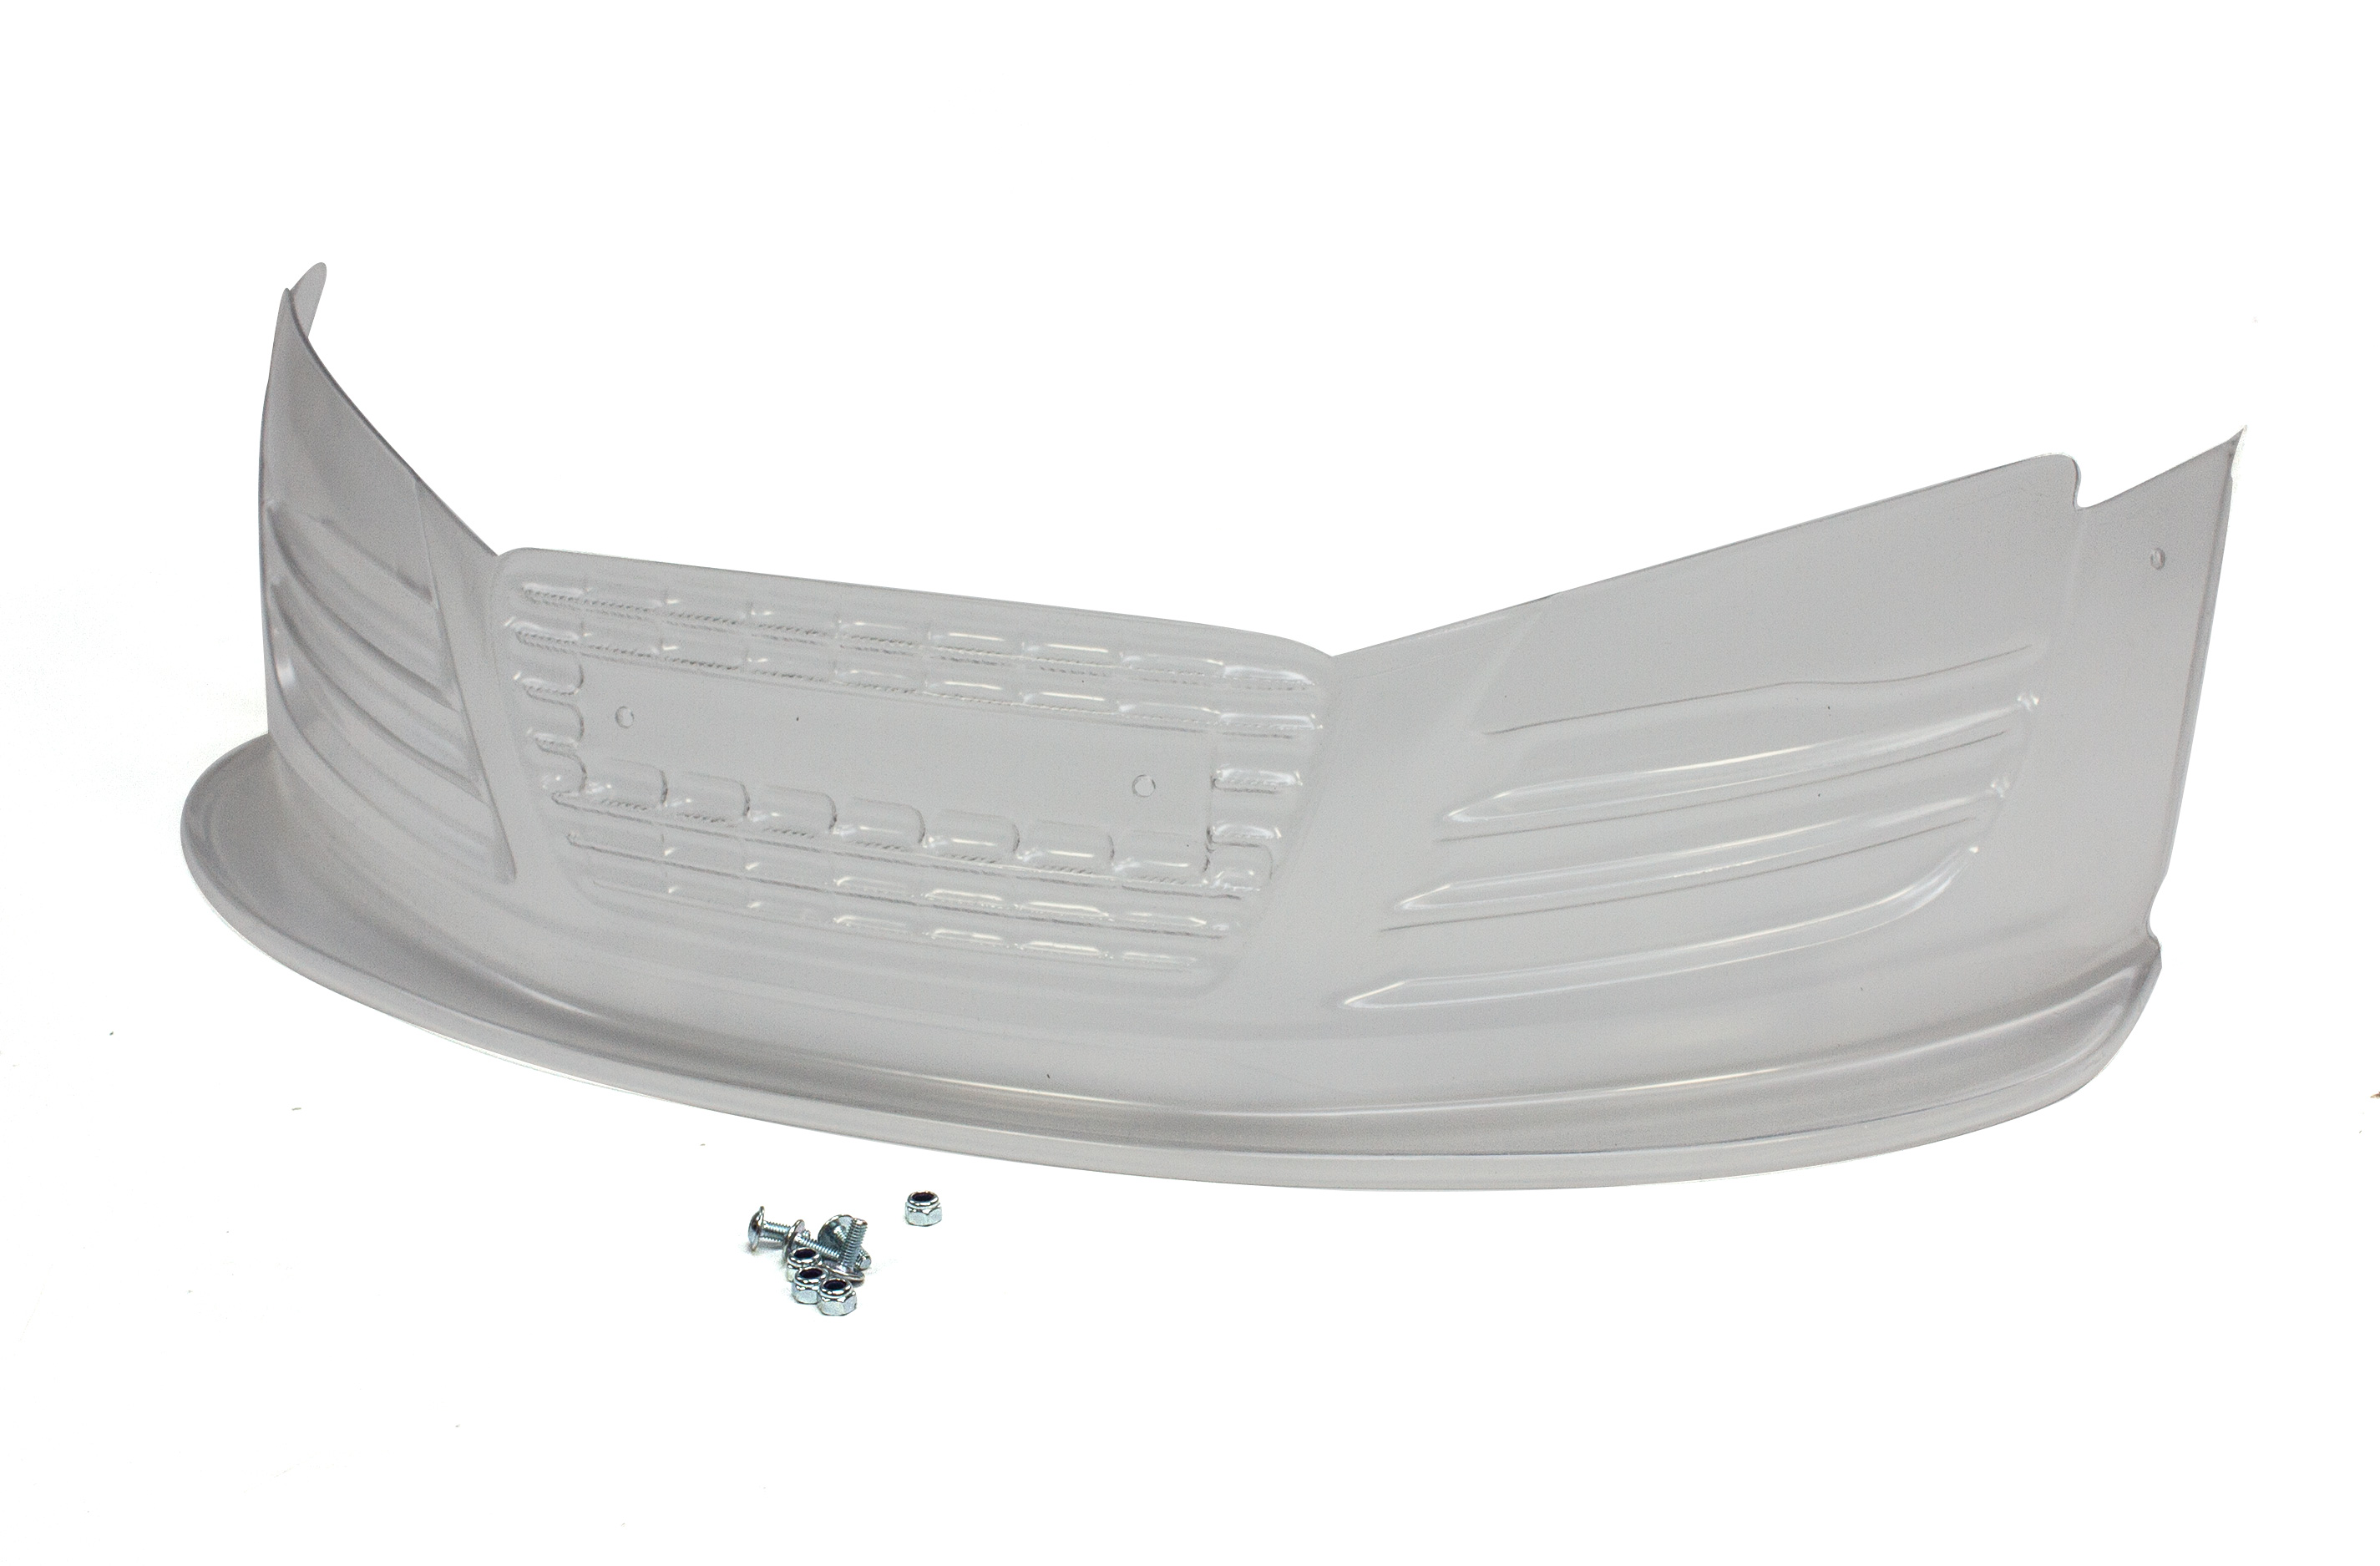 4171 FG Front body Audi R8 clear